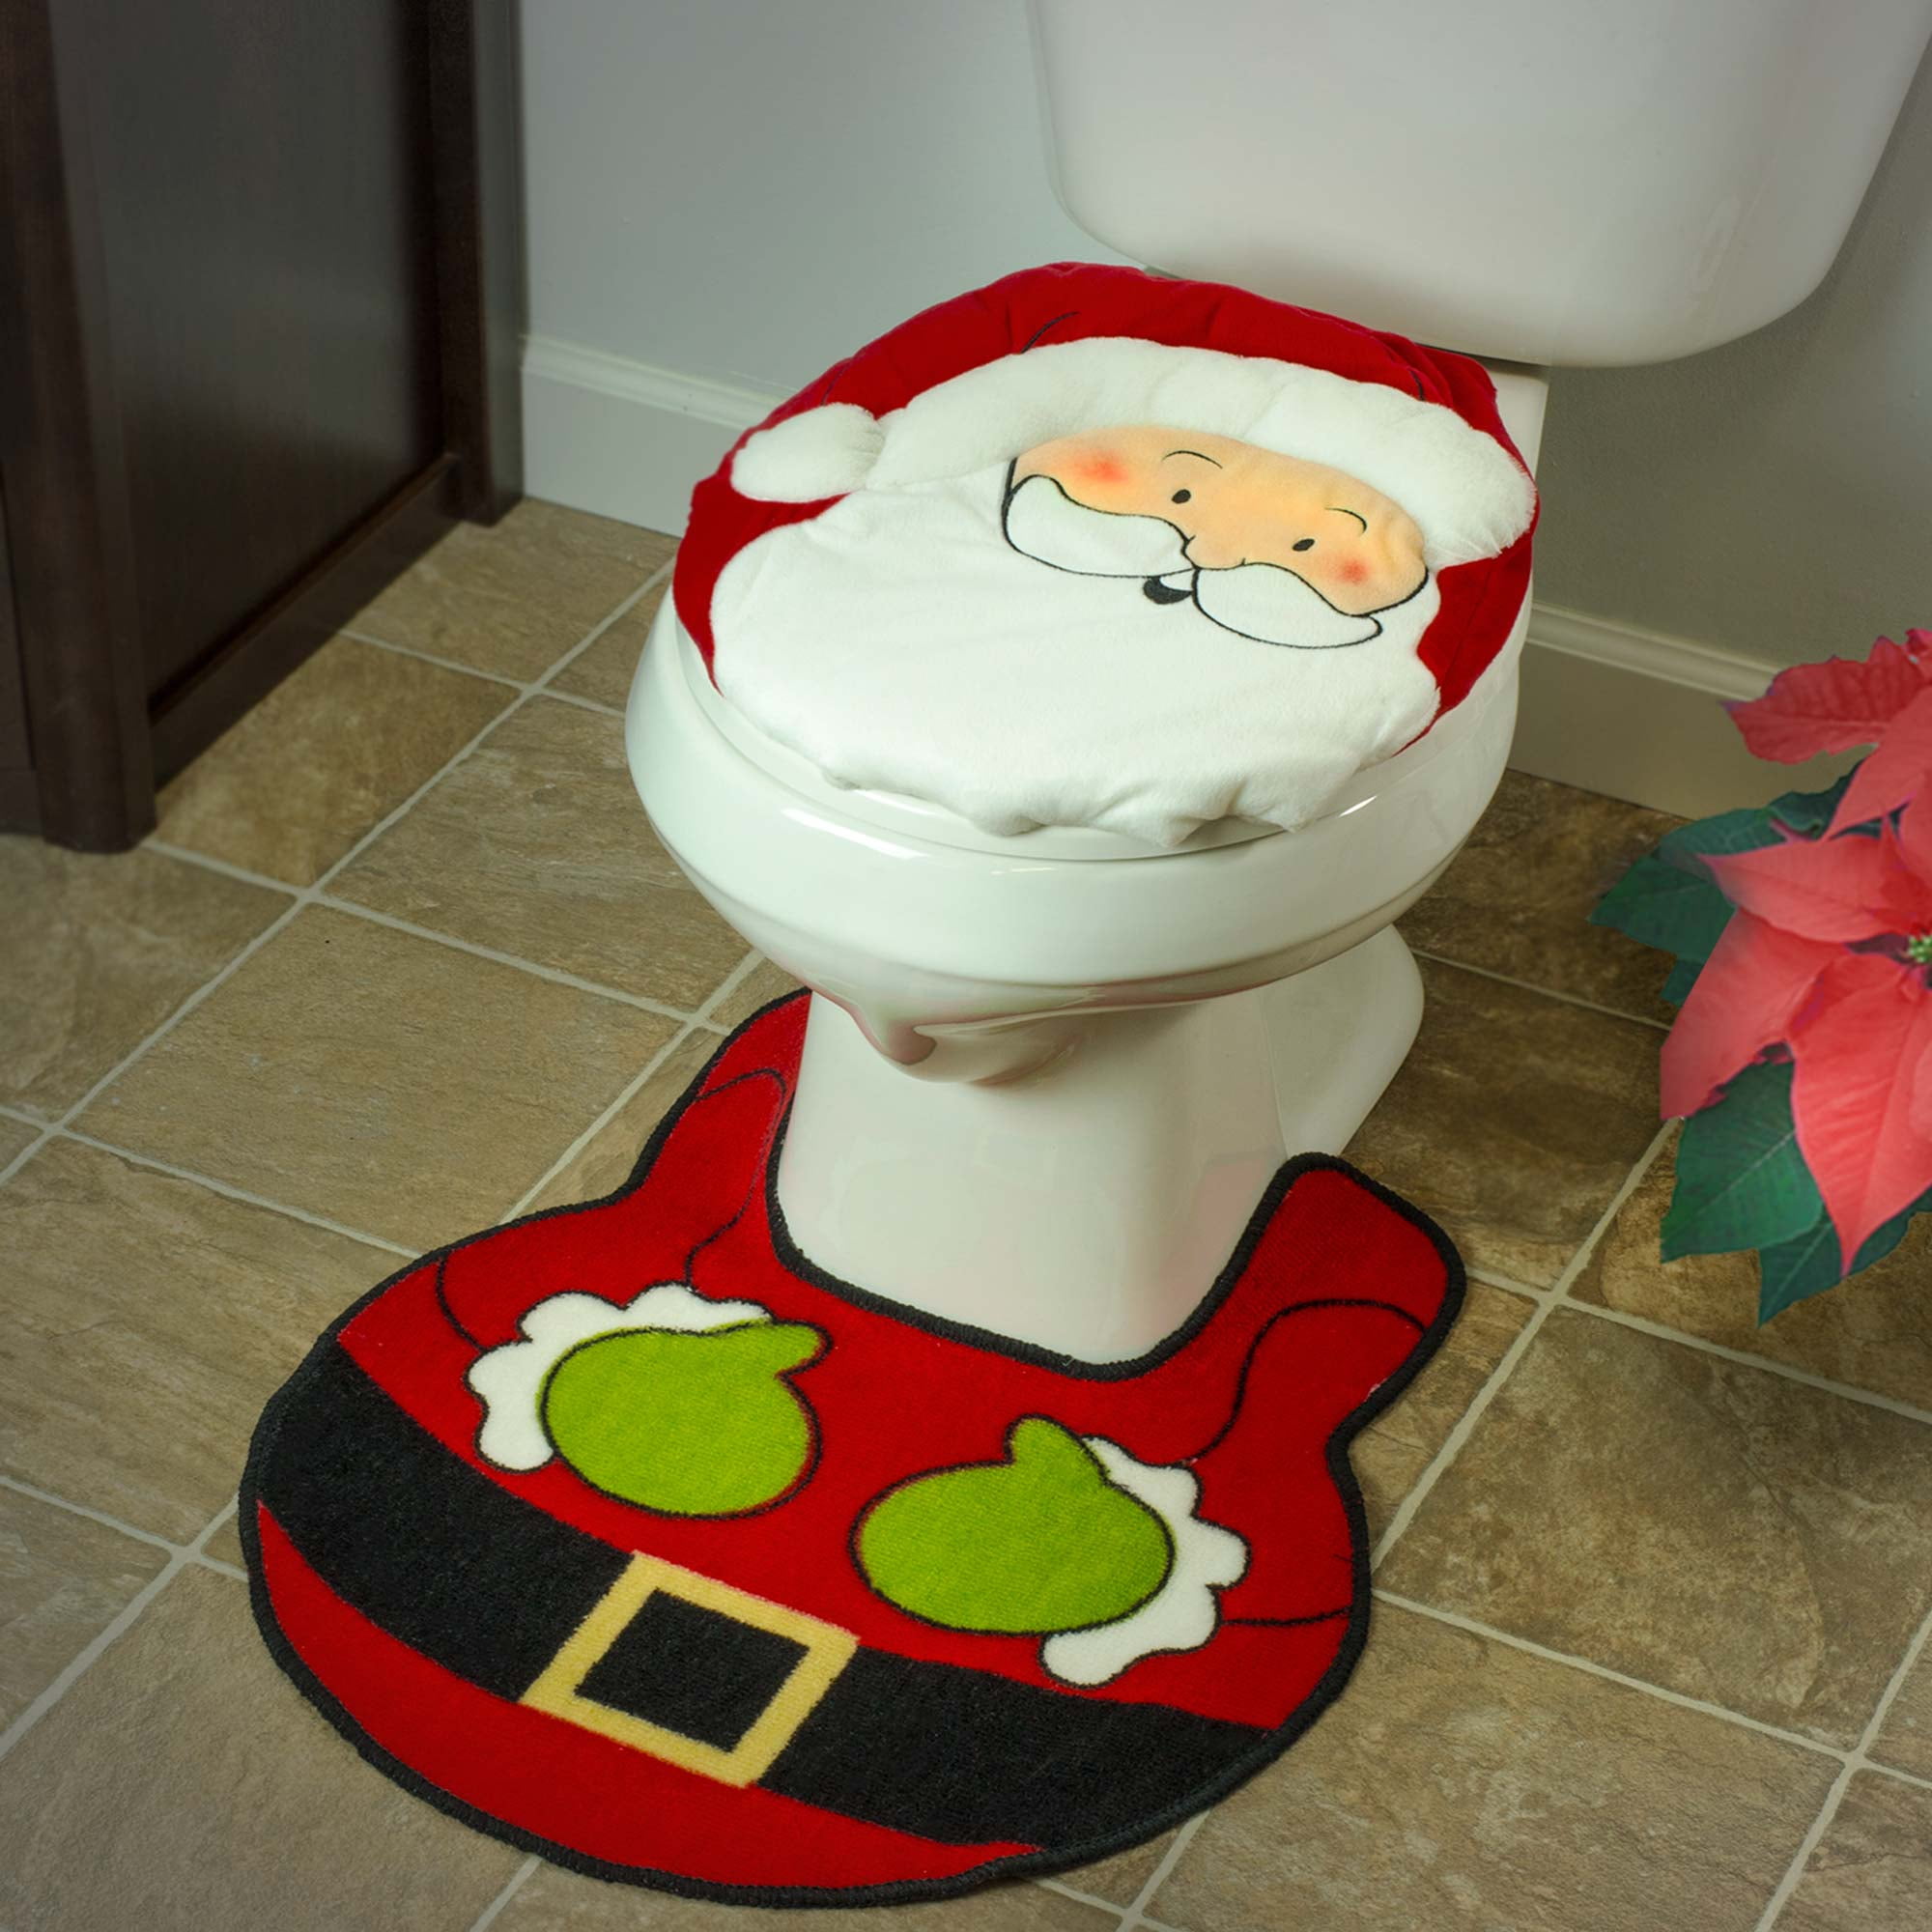 Holiday Bathroom Santa Claus Toilet Seat Cover and Rug 2 Piece Set Decorations